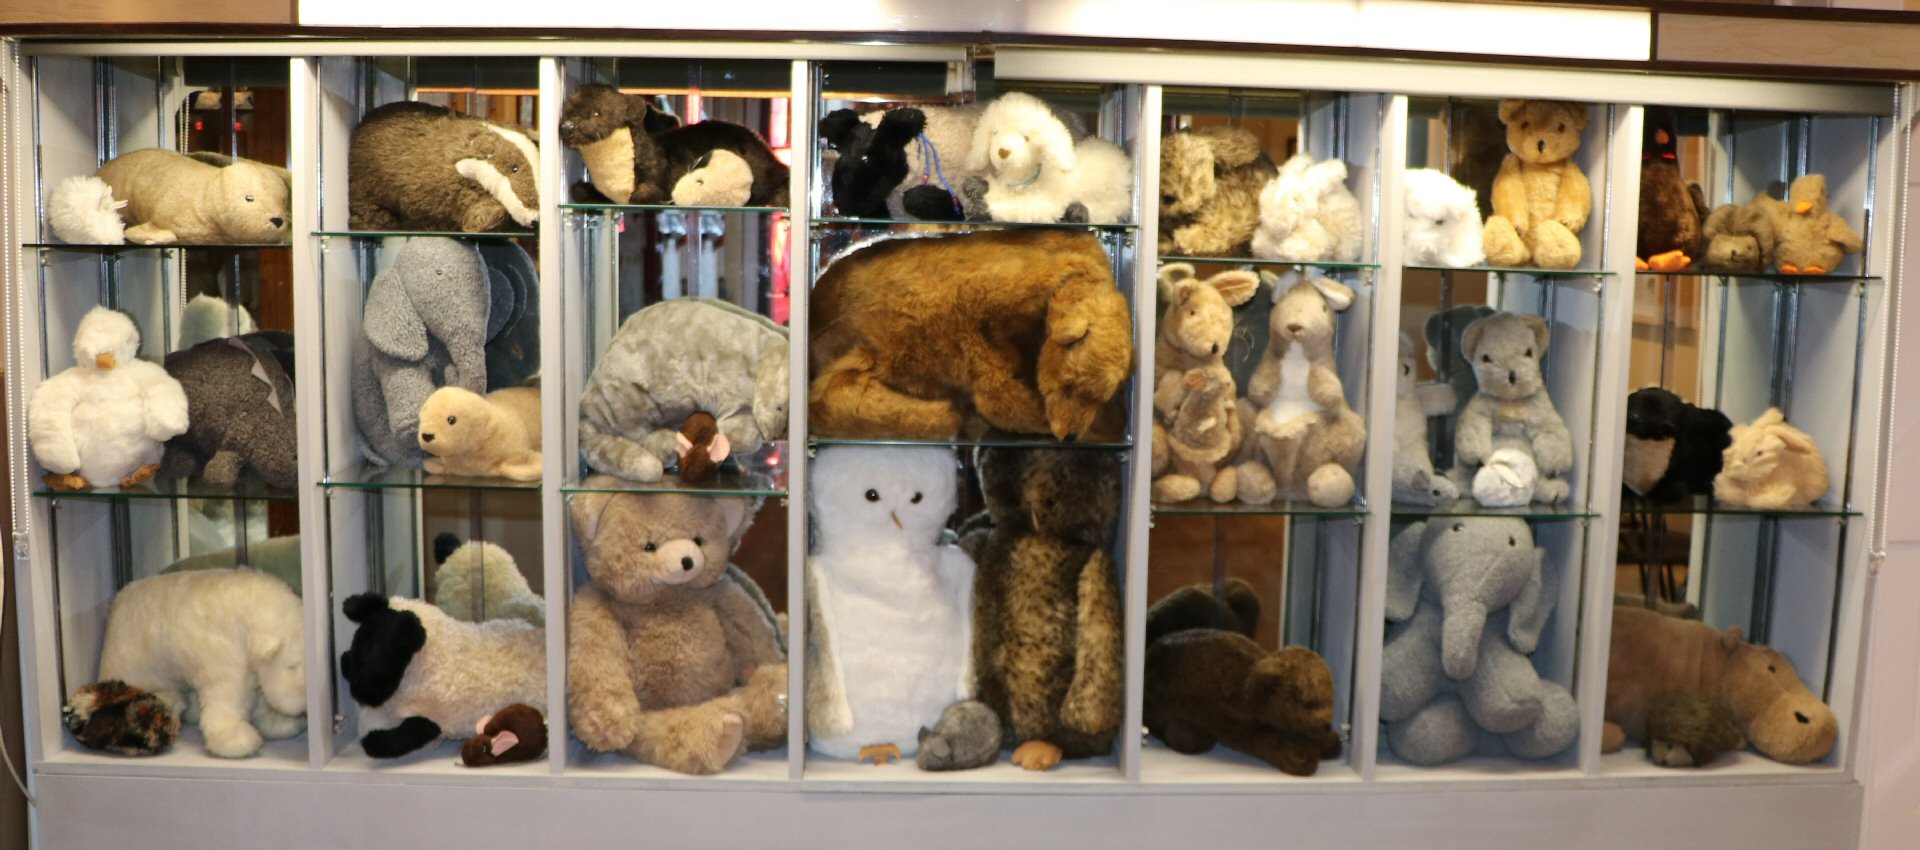 Alresford Crafts soft toy collection